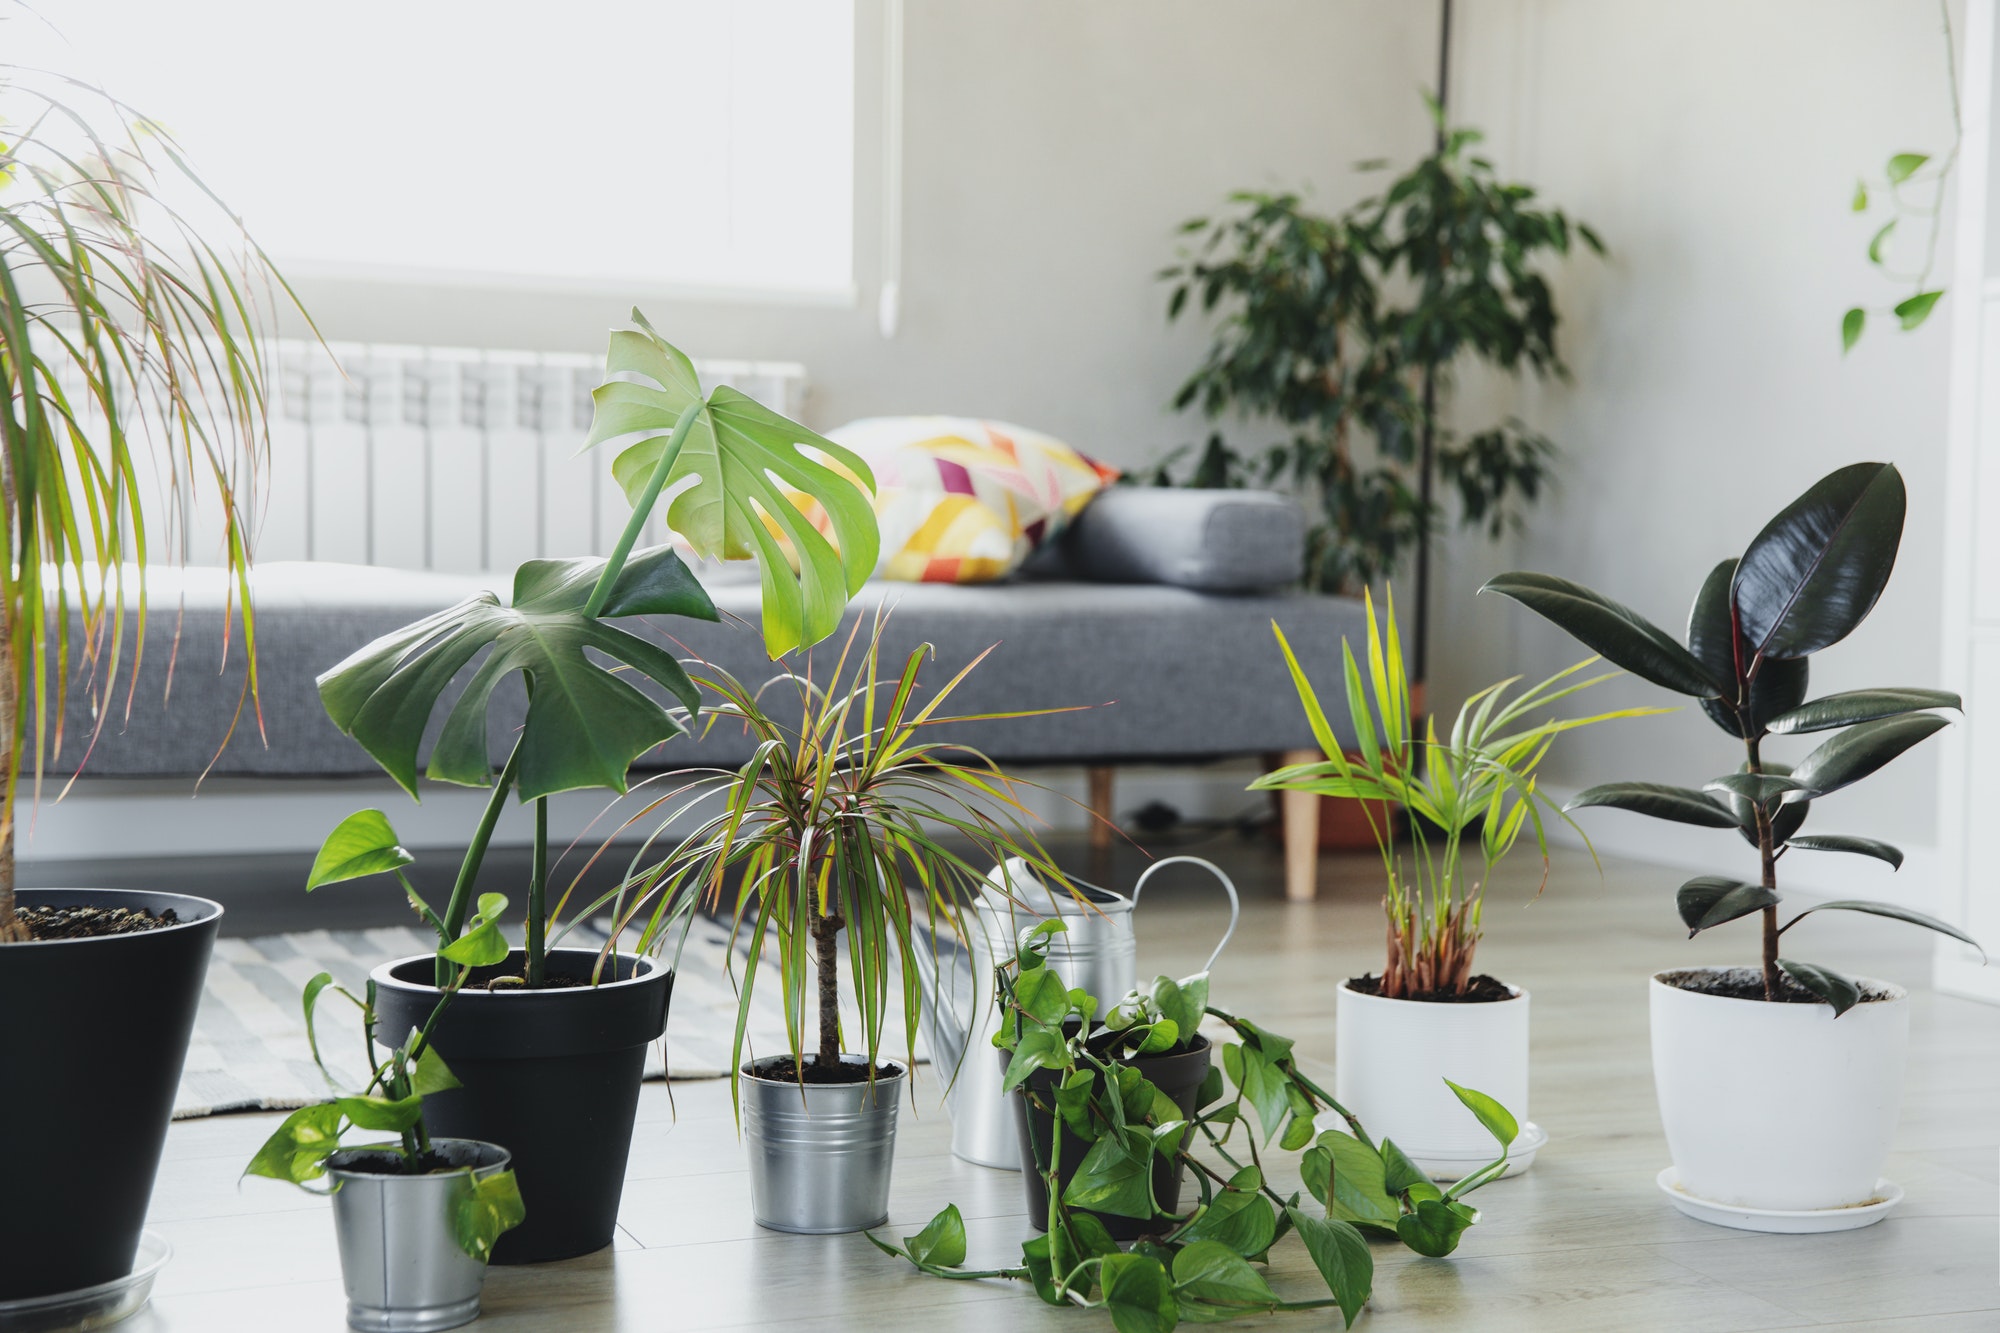 Collection of various tropical green plants in different pots indoor